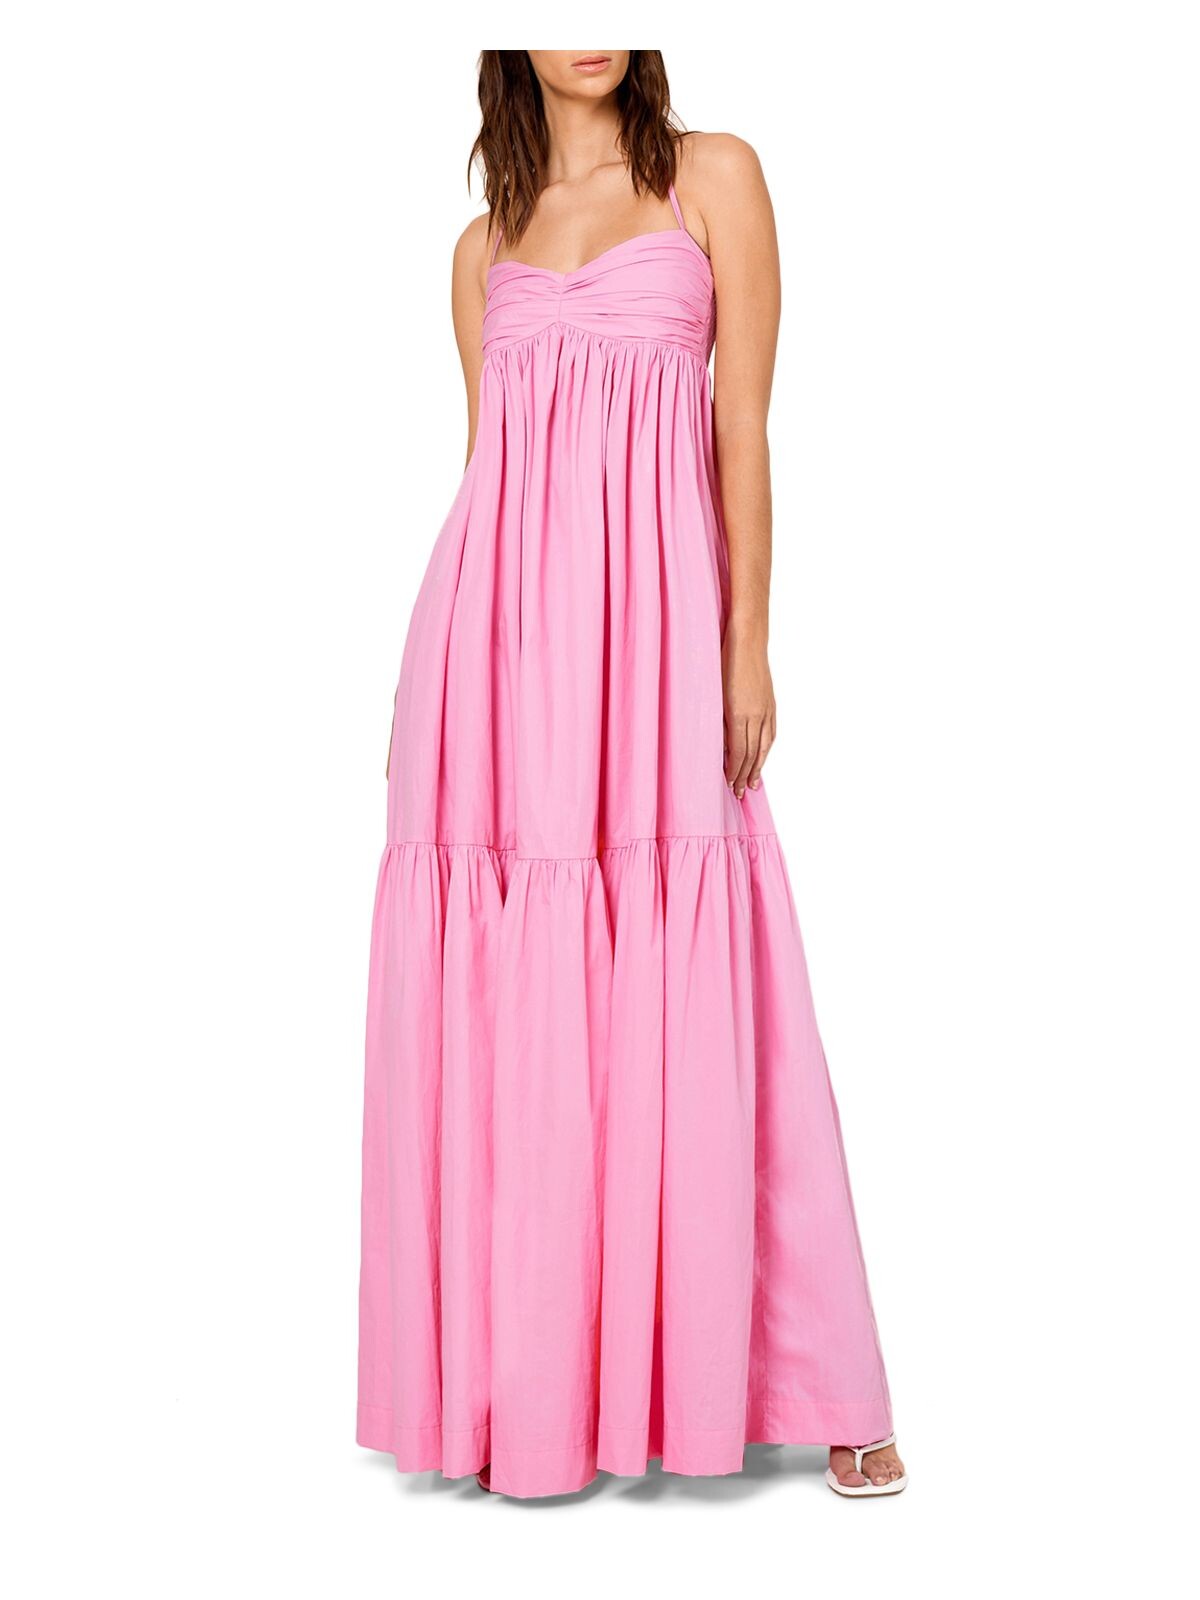 S/W/F Womens Pink Pocketed Smocked Tiered Pleated Tie Back Unlined Spaghetti Strap Sweetheart Neckline Full-Length Gown Dress S